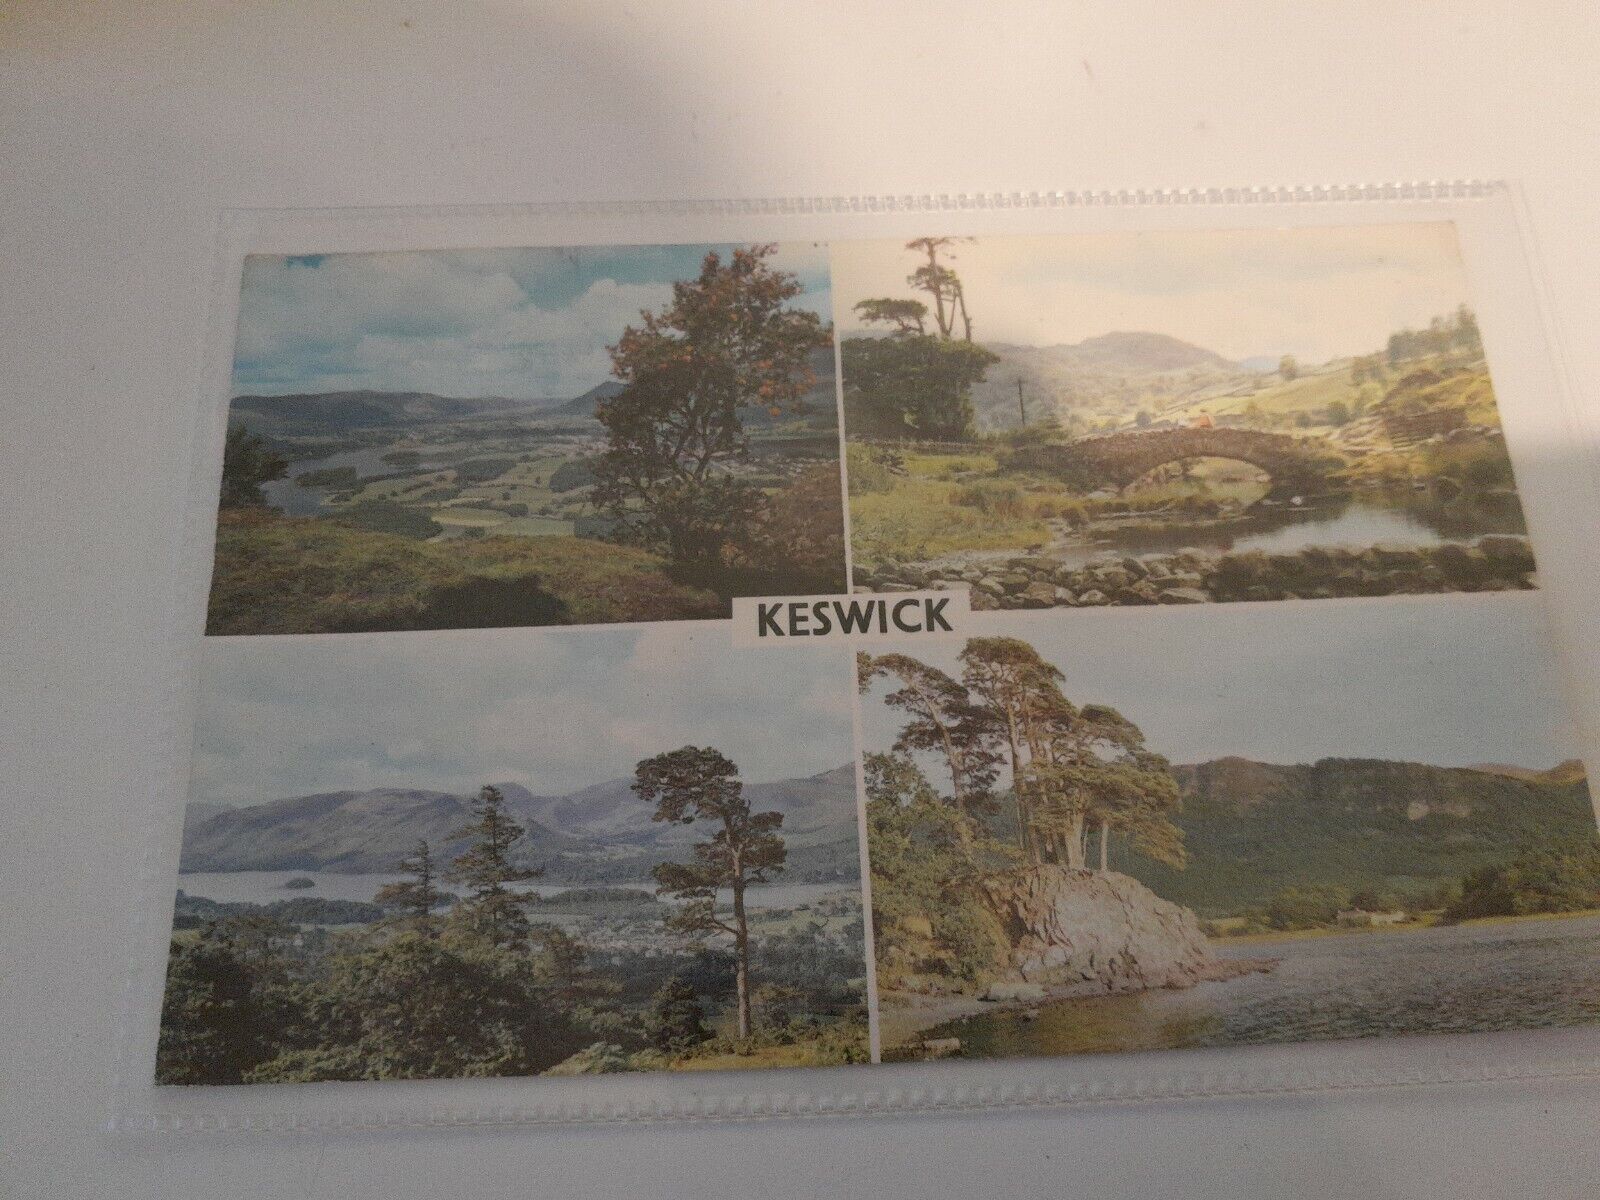 House Clearance - VINTAGE POSTCARD KESWICK MULTIVIEW POSTED 1970